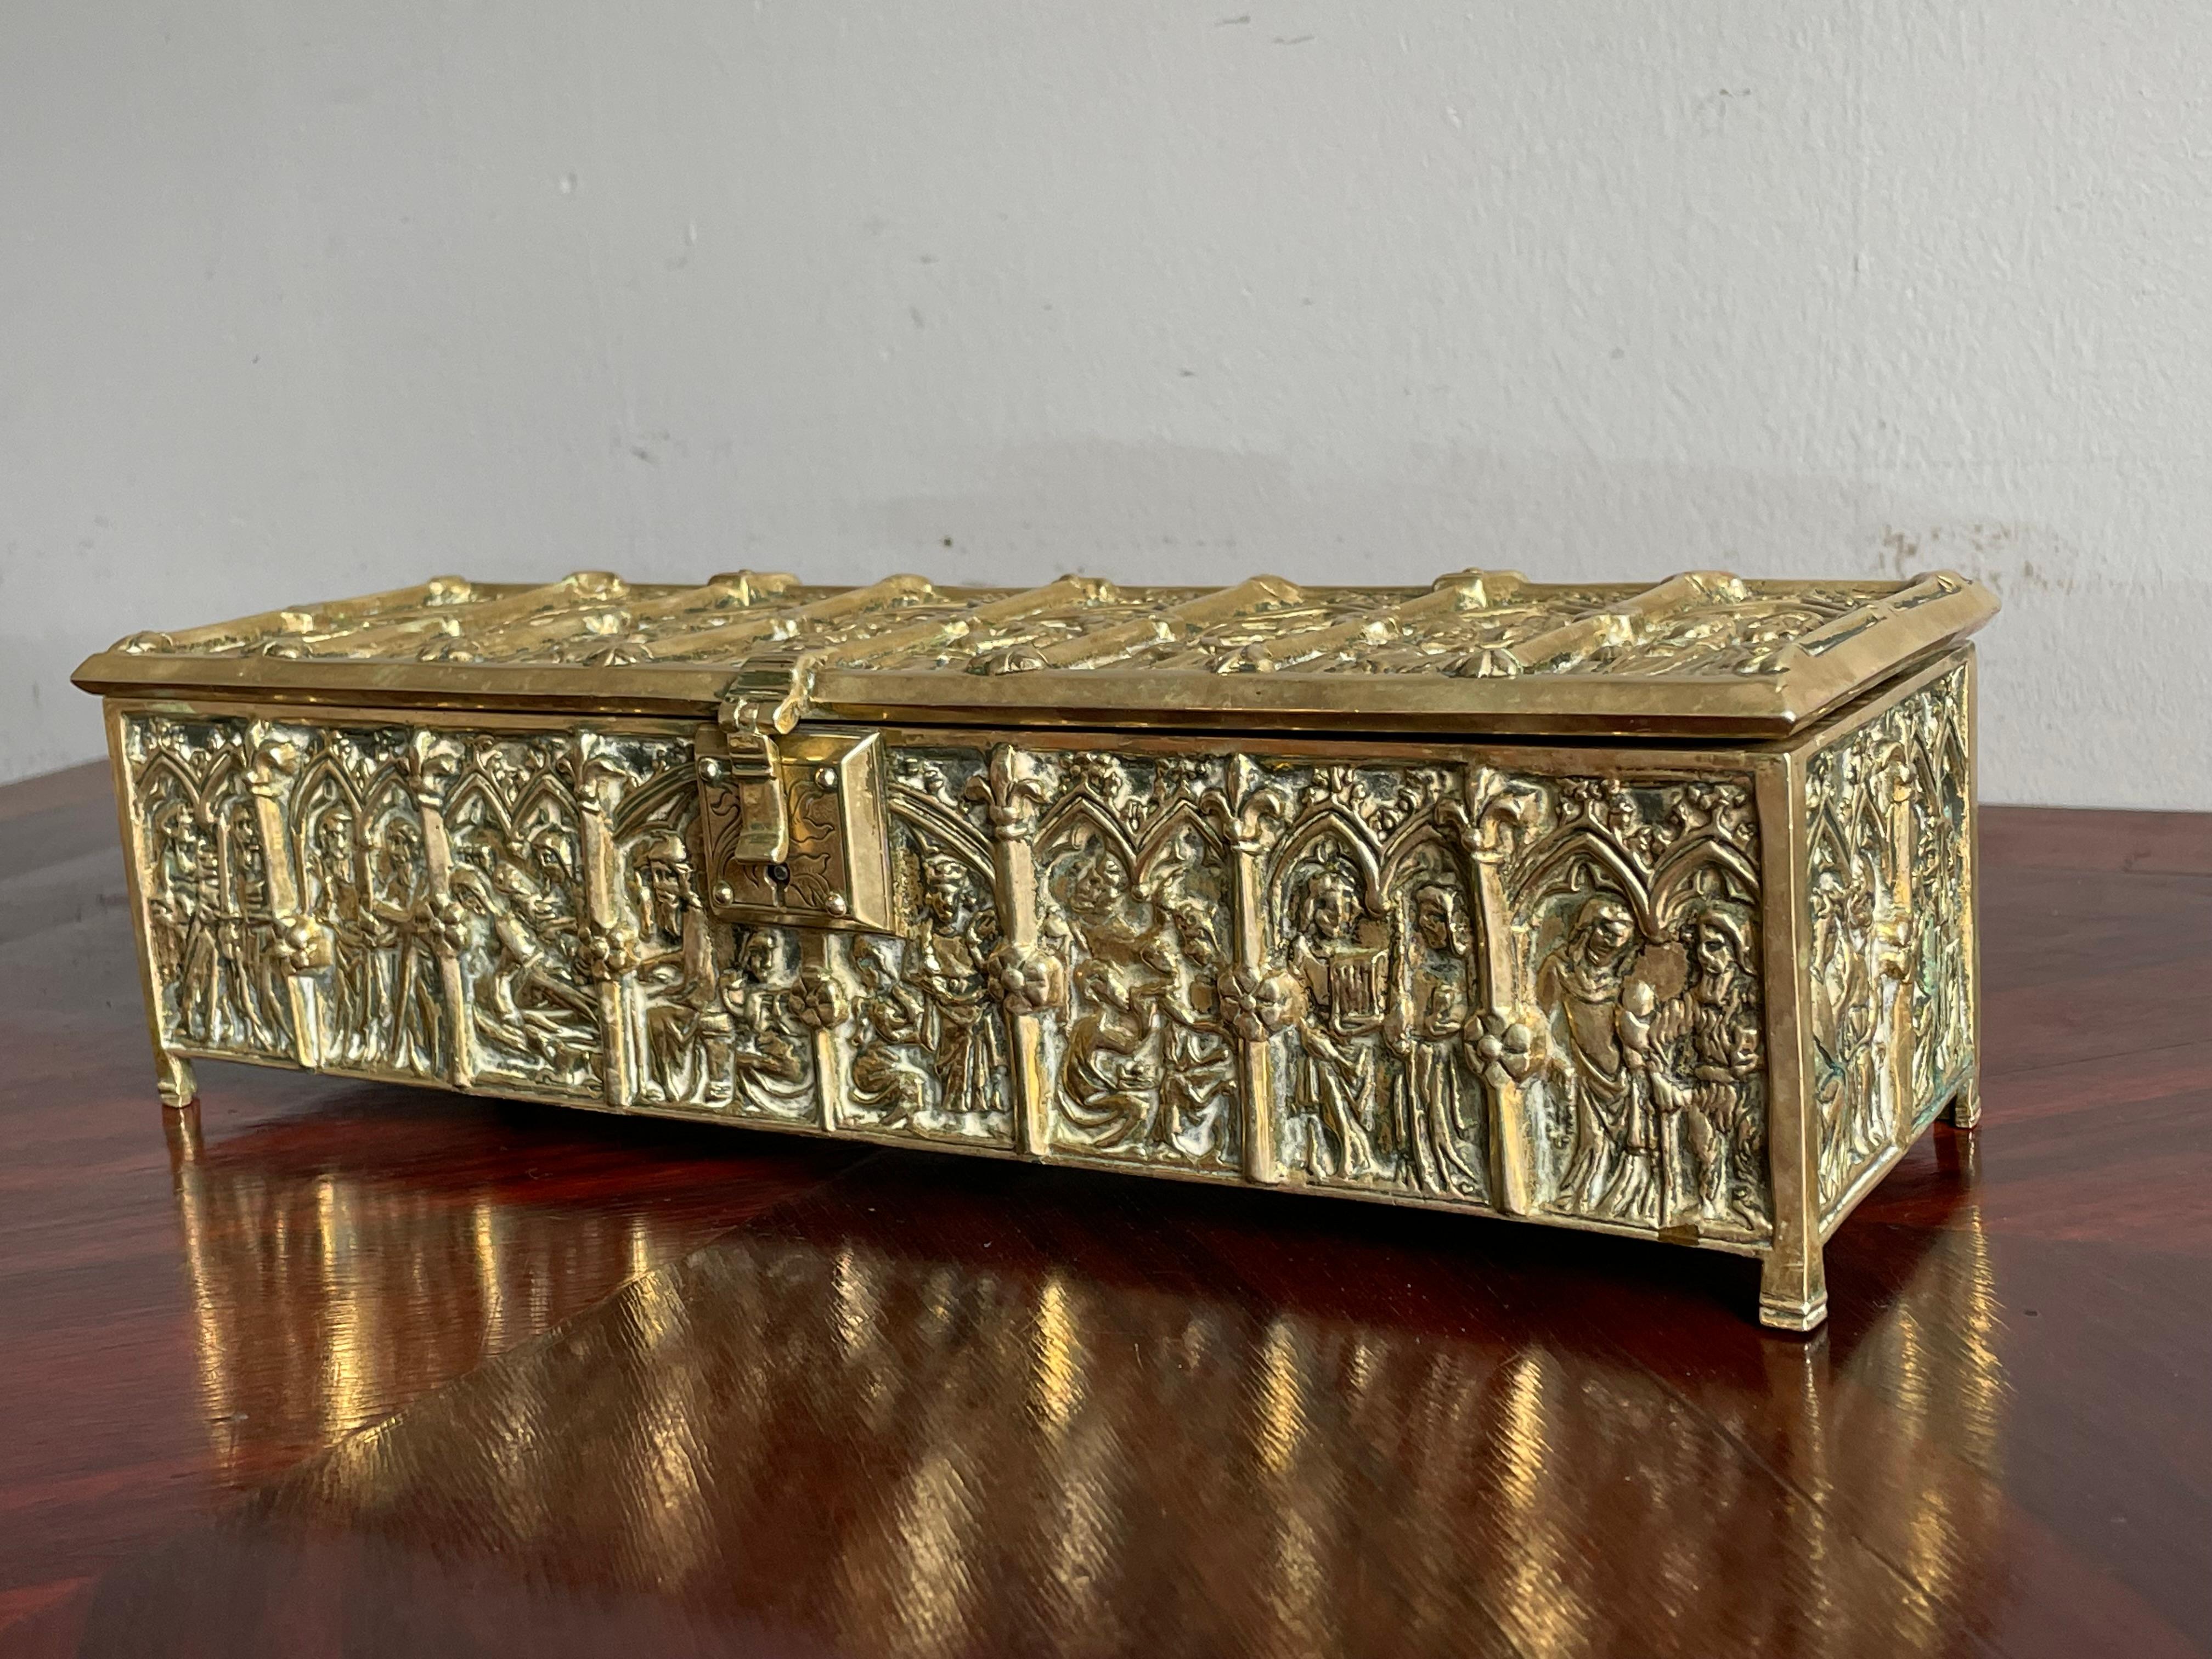 Antique Bronze Box with Gothic Church Window Panels by Adolph Frankau&Co, London For Sale 11